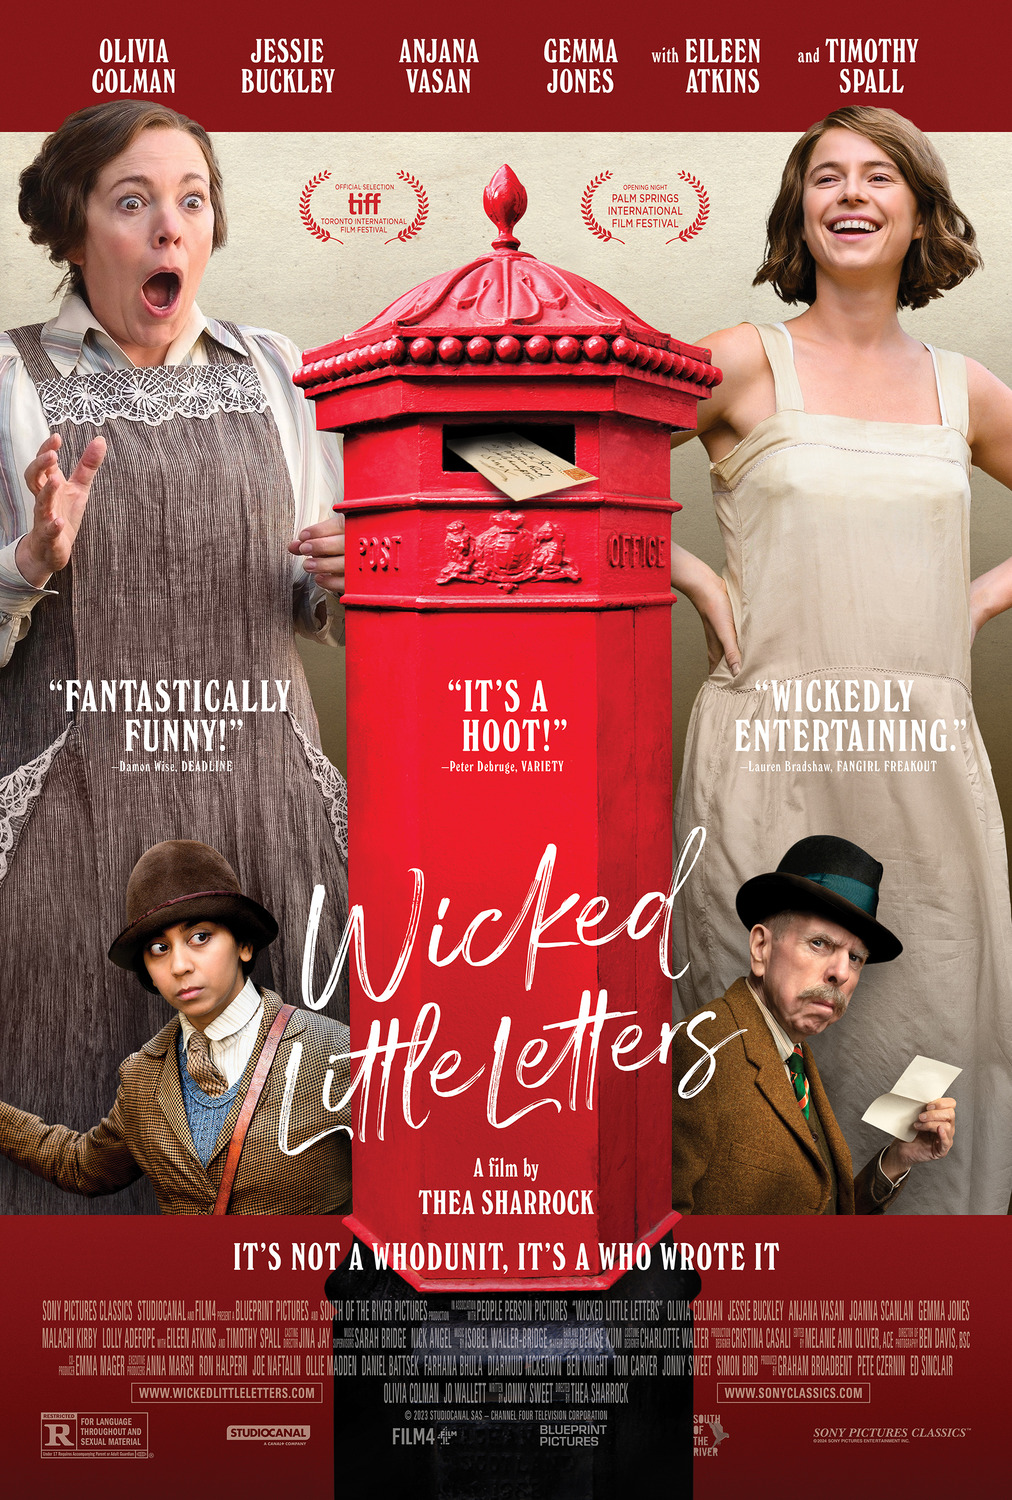 Wicked Little Letters starring Olivia Colman and Jessie Buckley